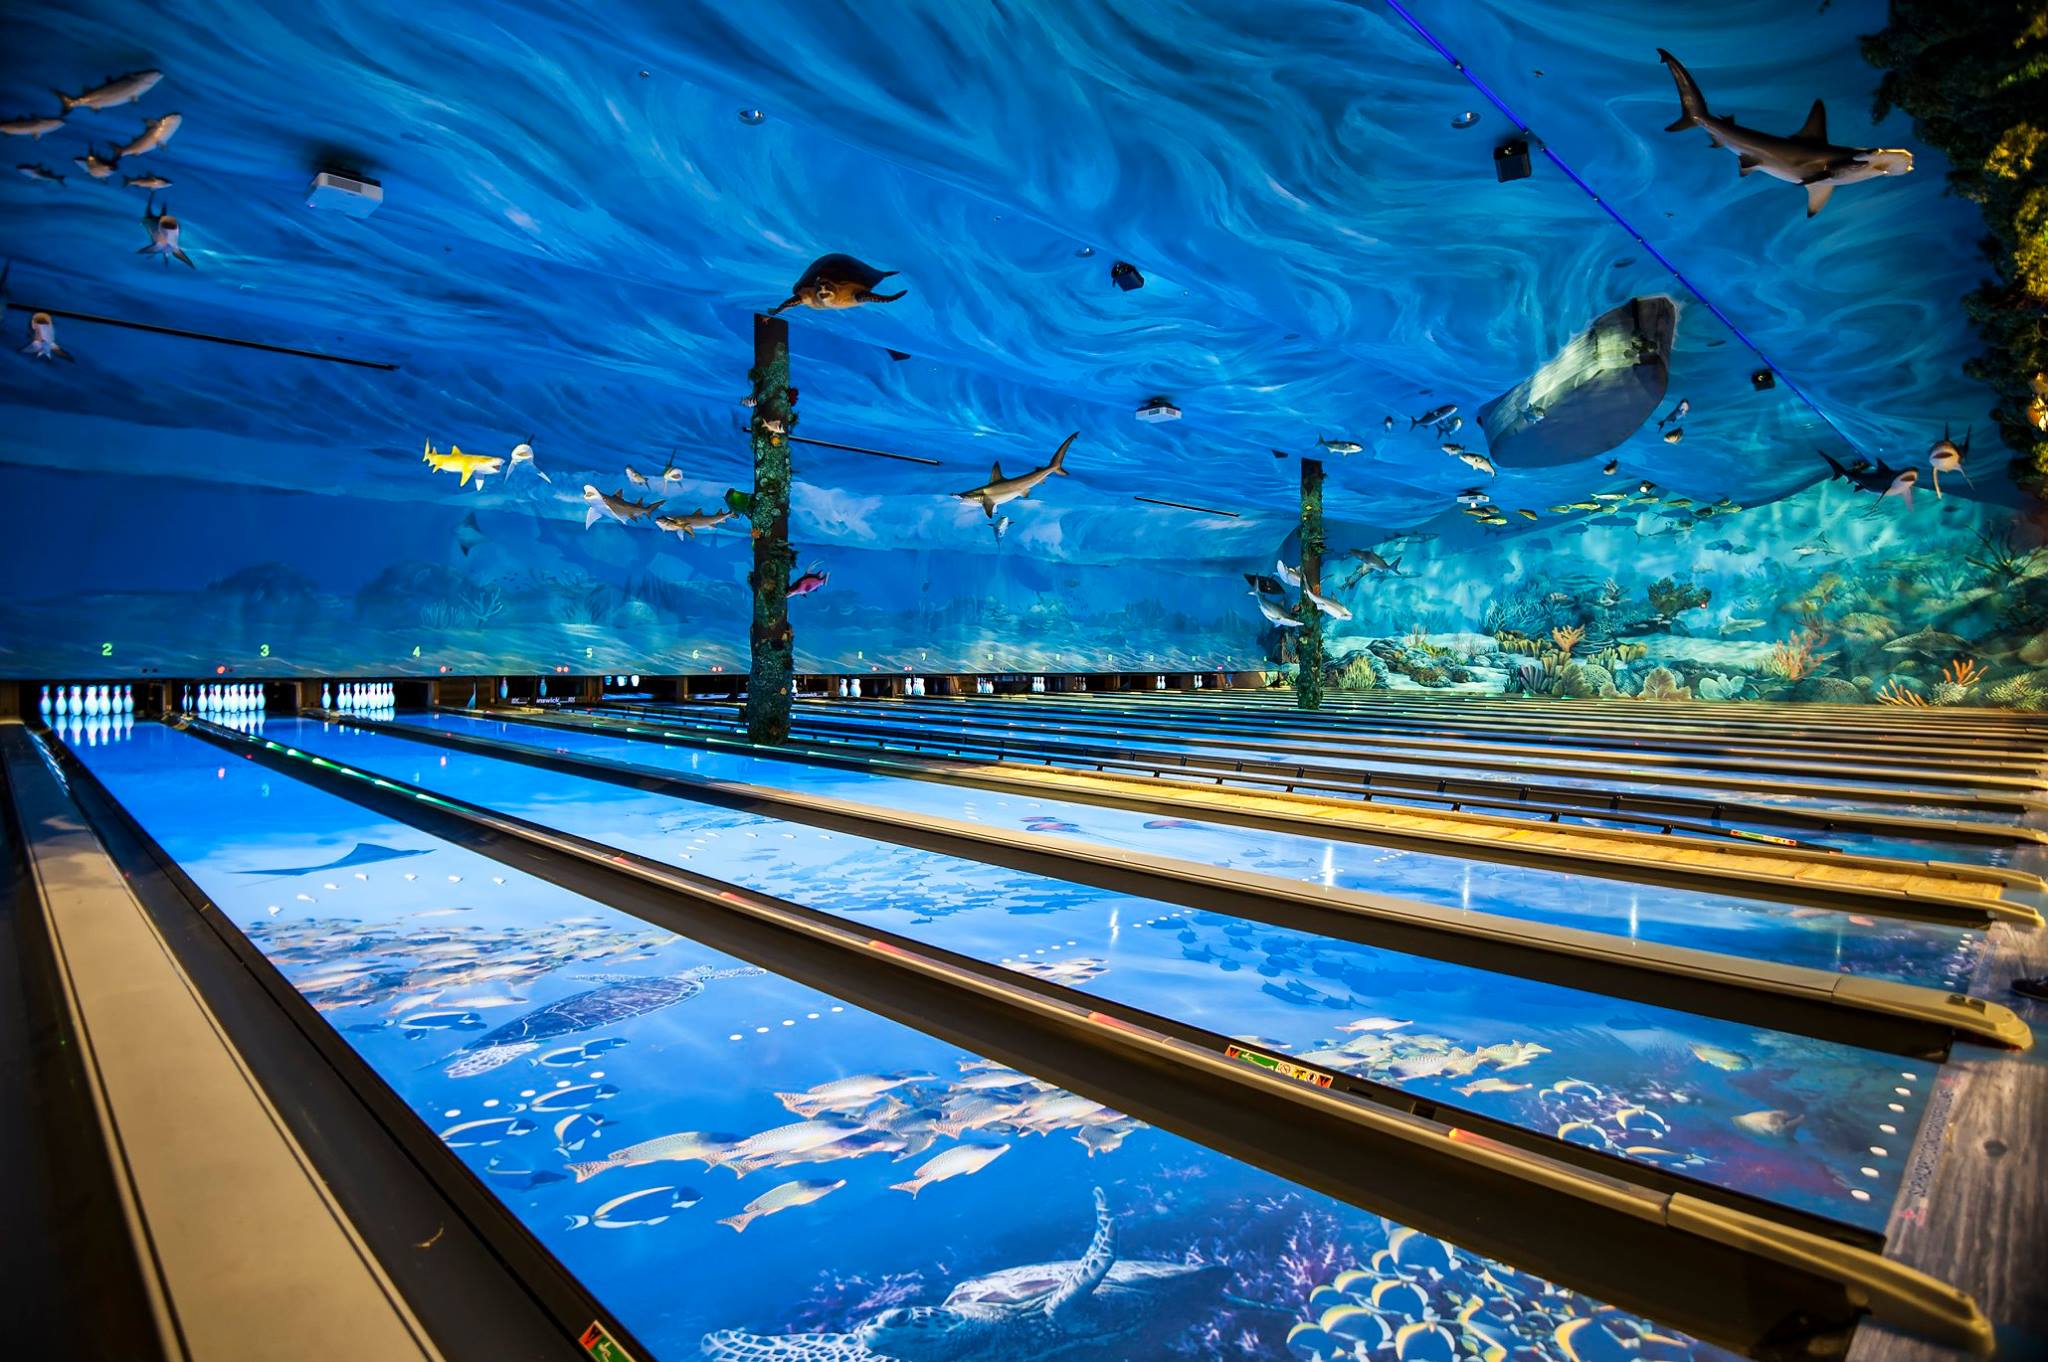 This One-Of-A-Kind Ocean Themed Restaurant And Bowling Alley Iowa